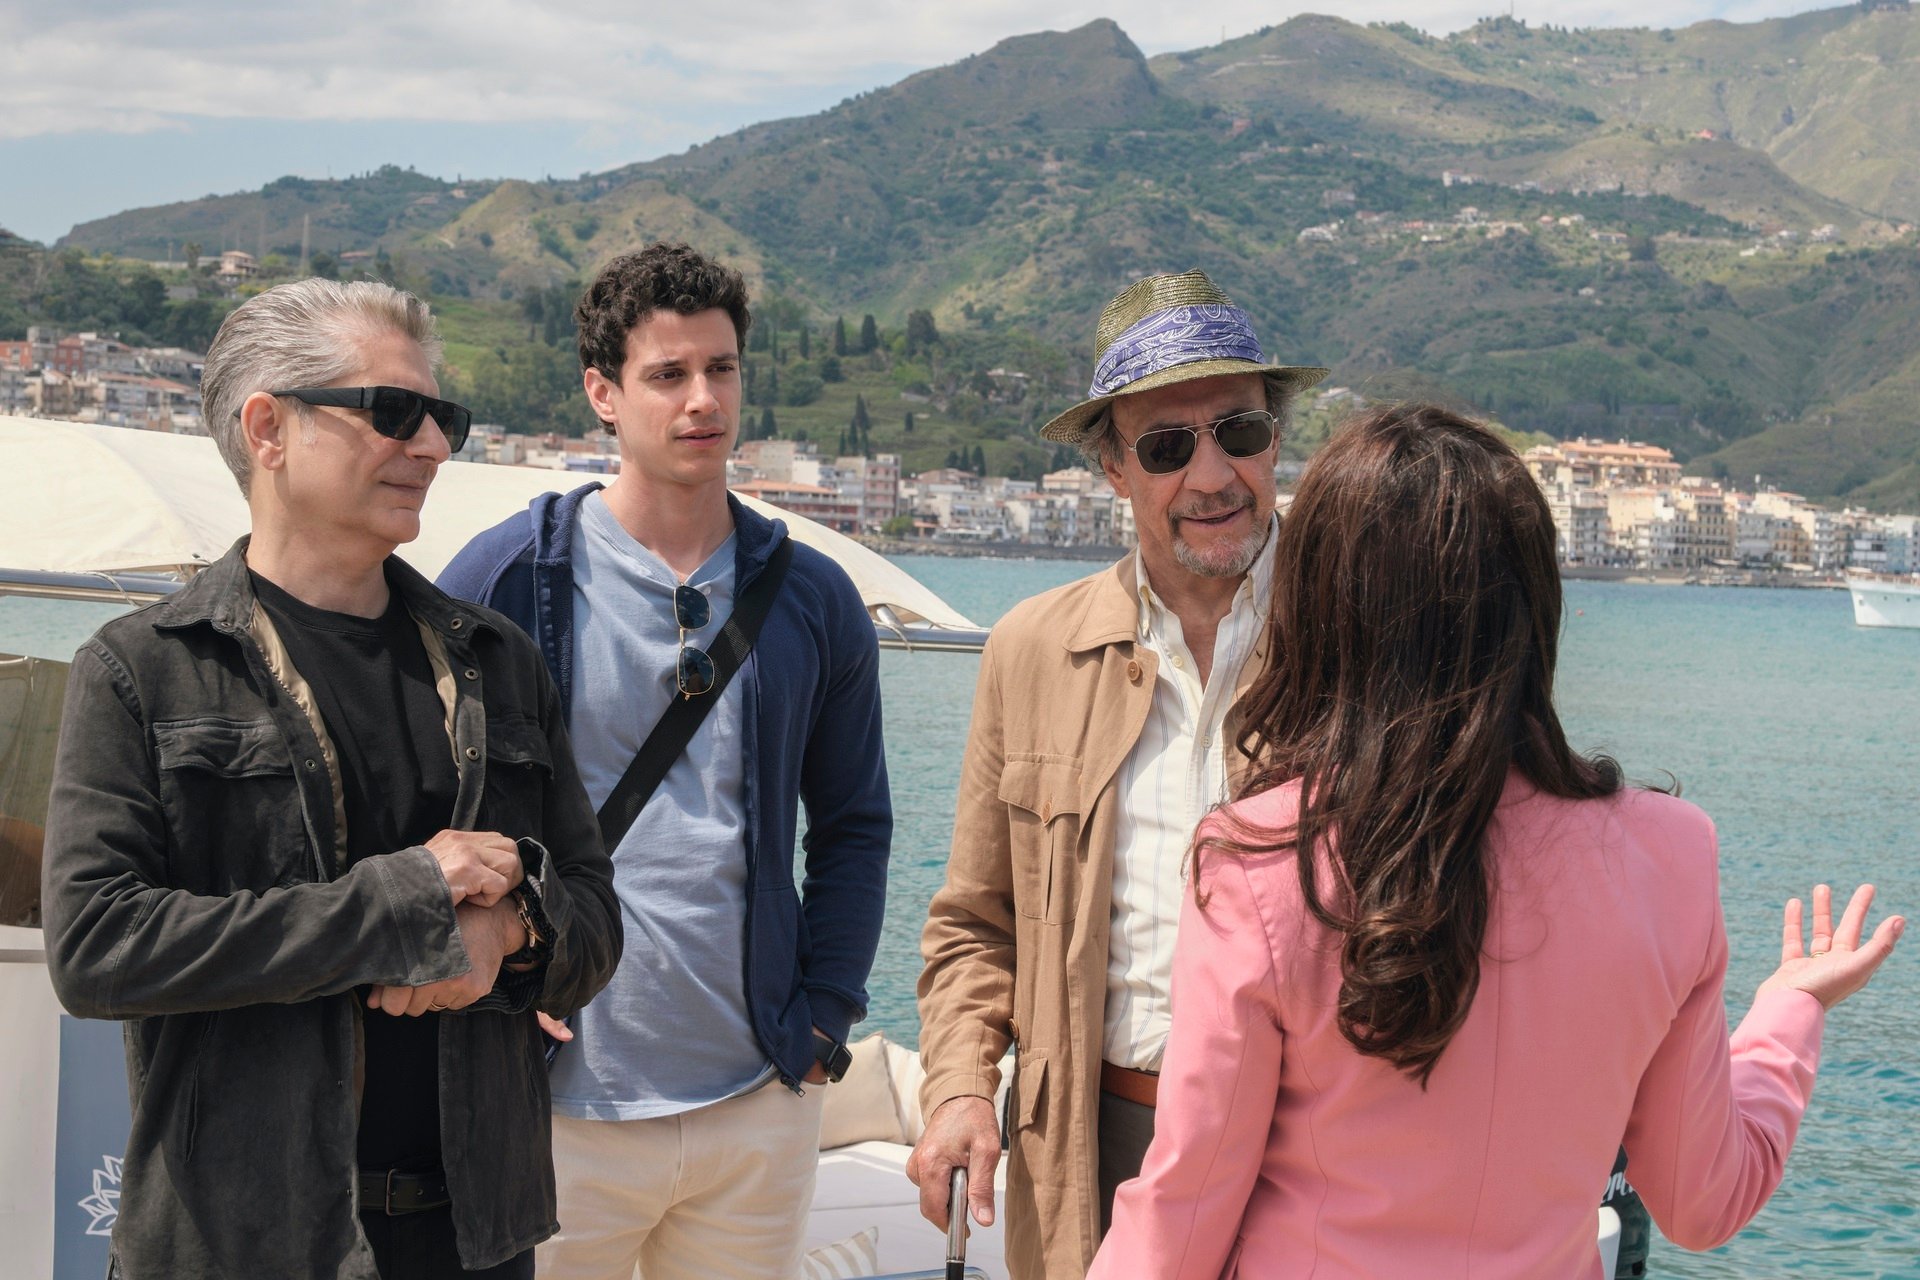 ‘The White Lotus: Sicily’ Season 2: Michael Imperioli, Adam DiMarco, and F. Murray Abraham talking together